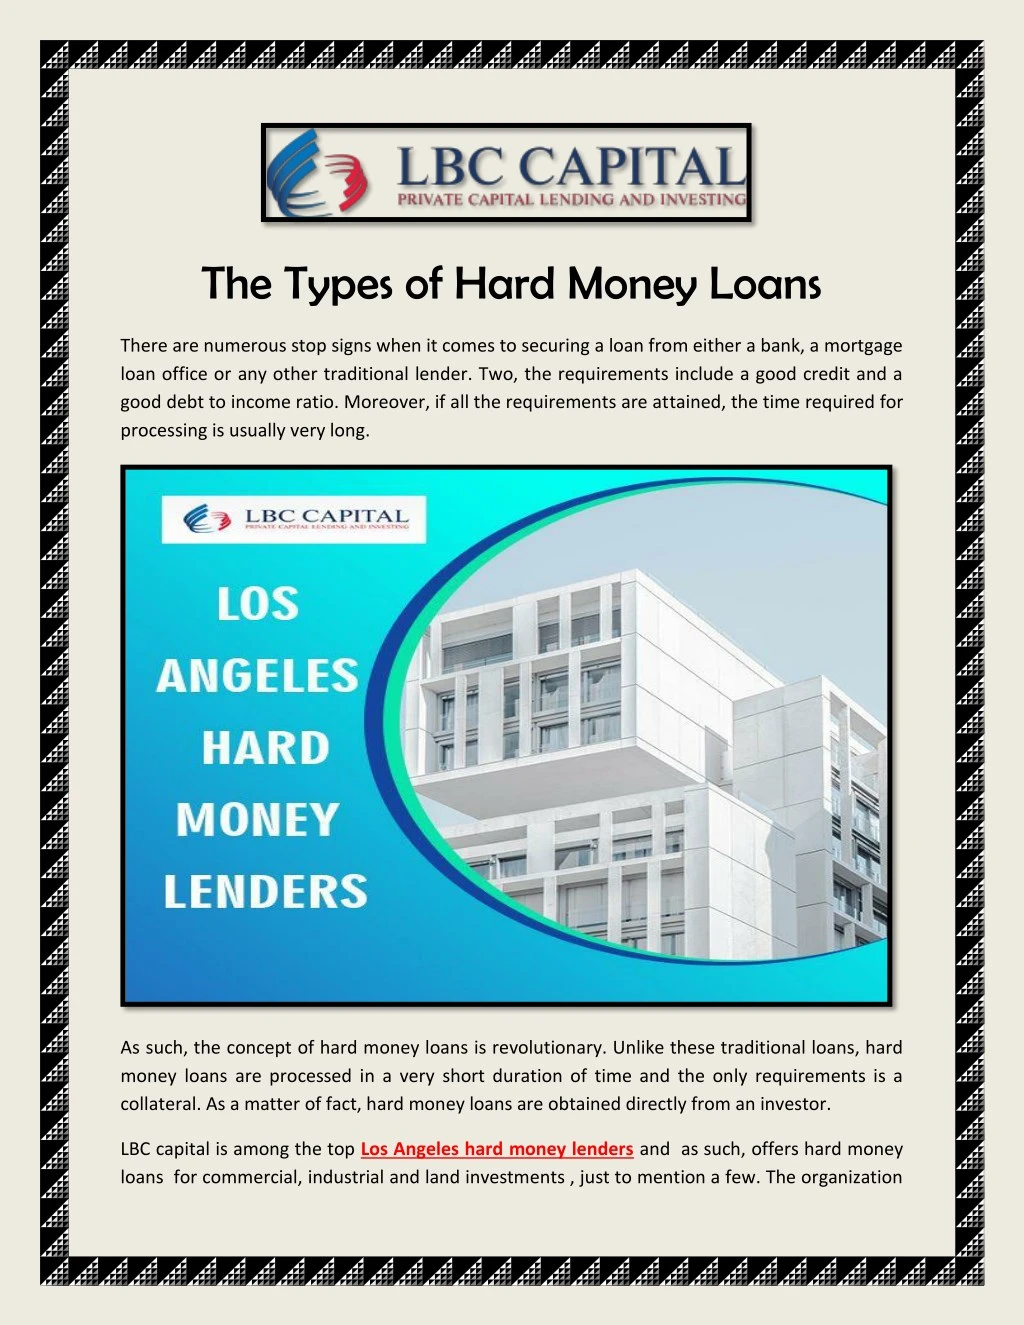 the types of hard money loans